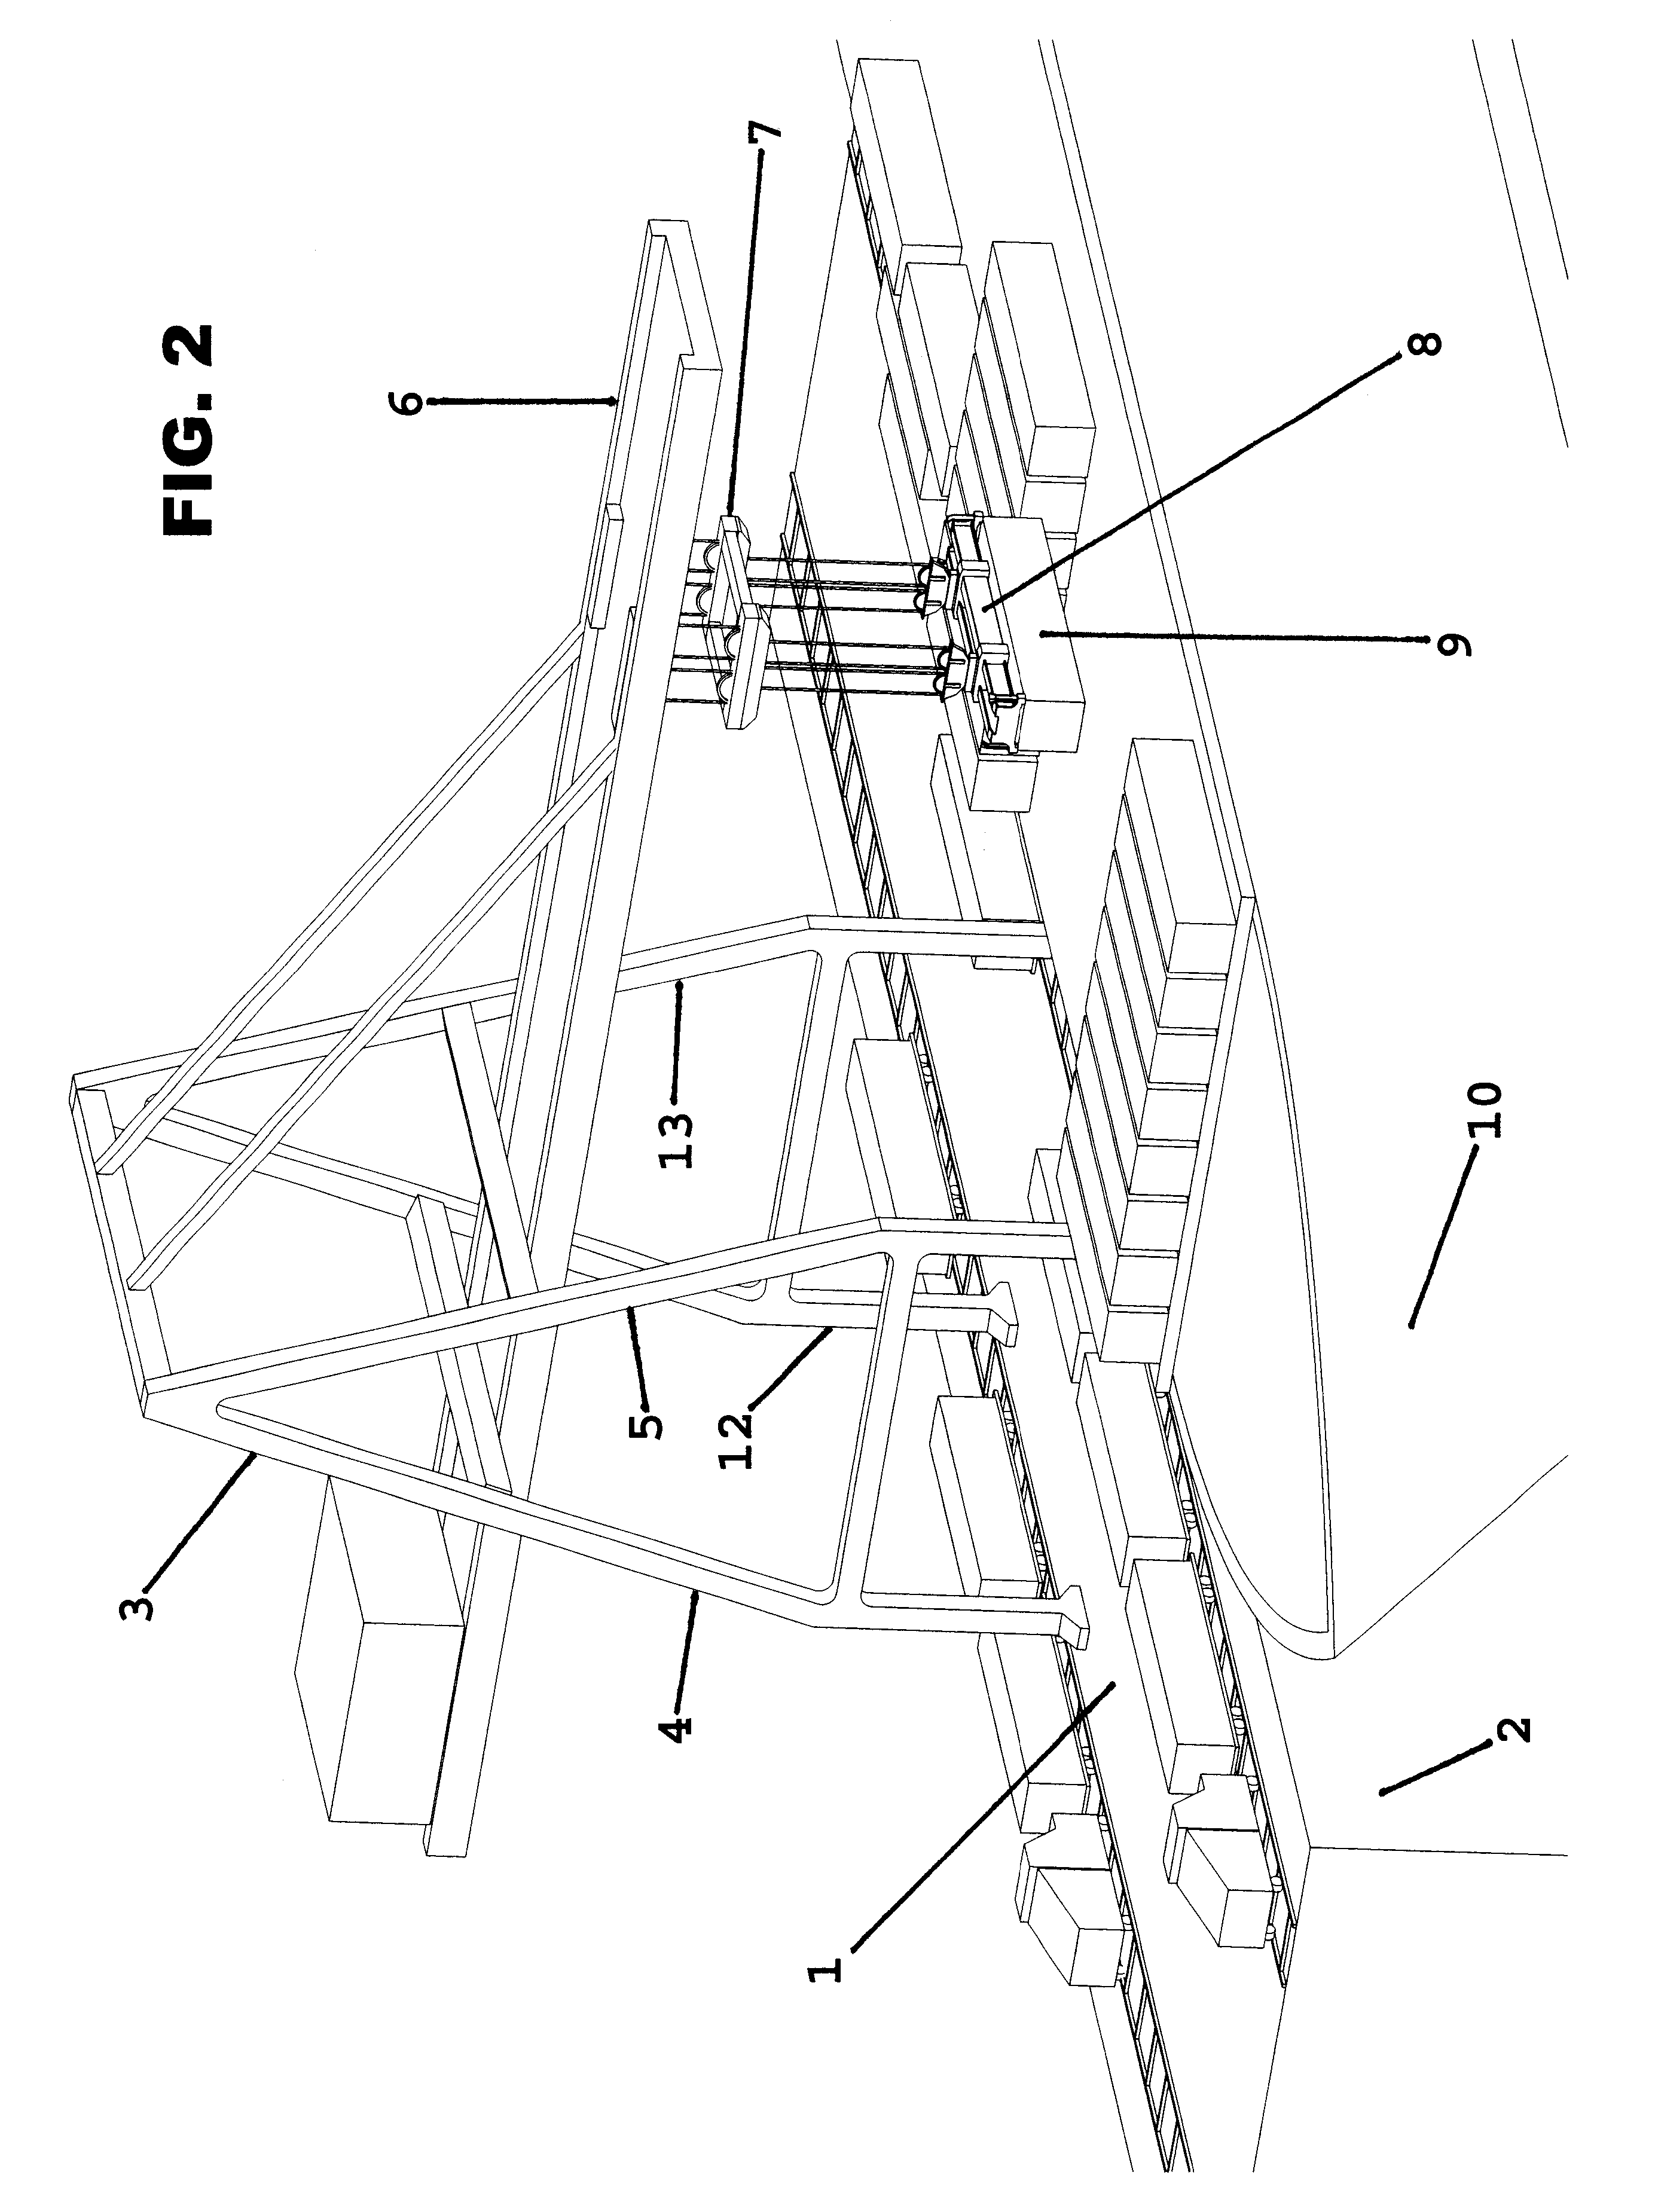 Container crane radiation detection systems and methods